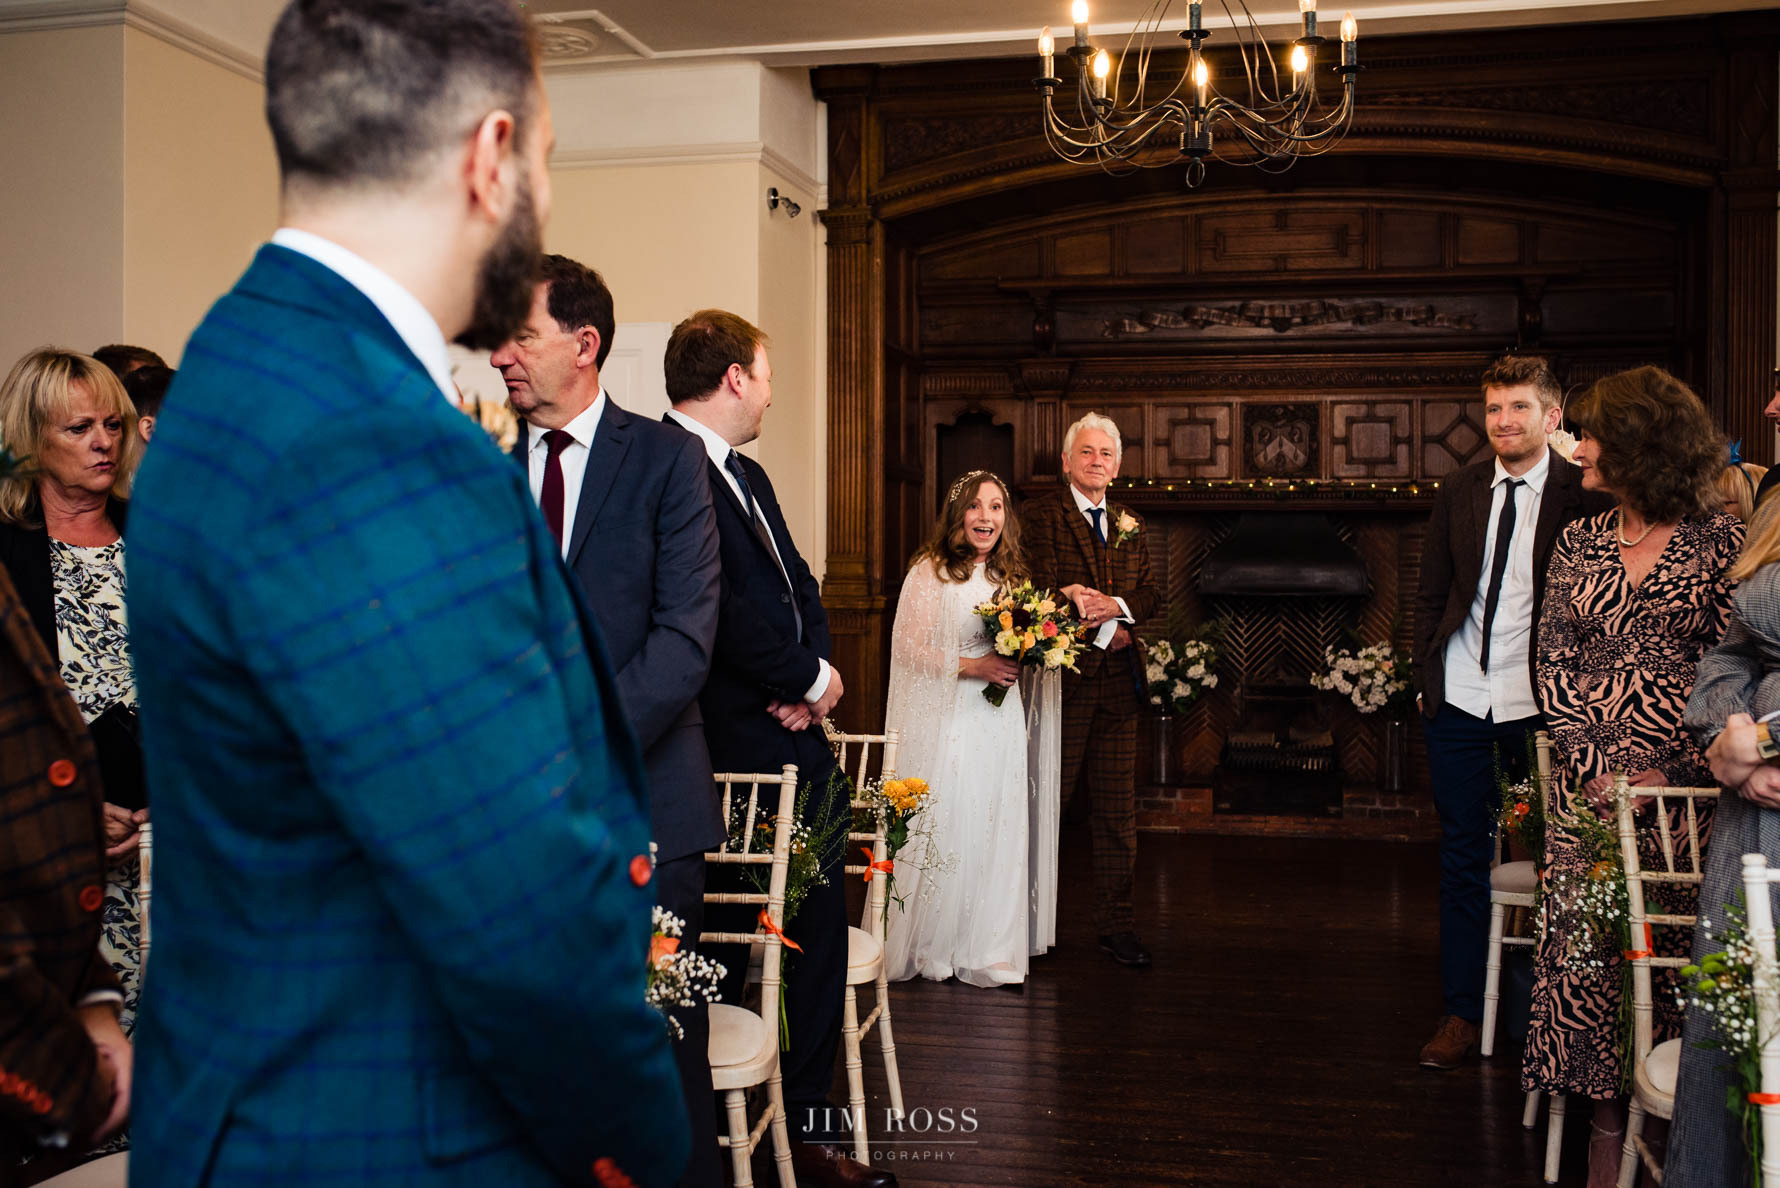 dad and excited bride enter ceremony room